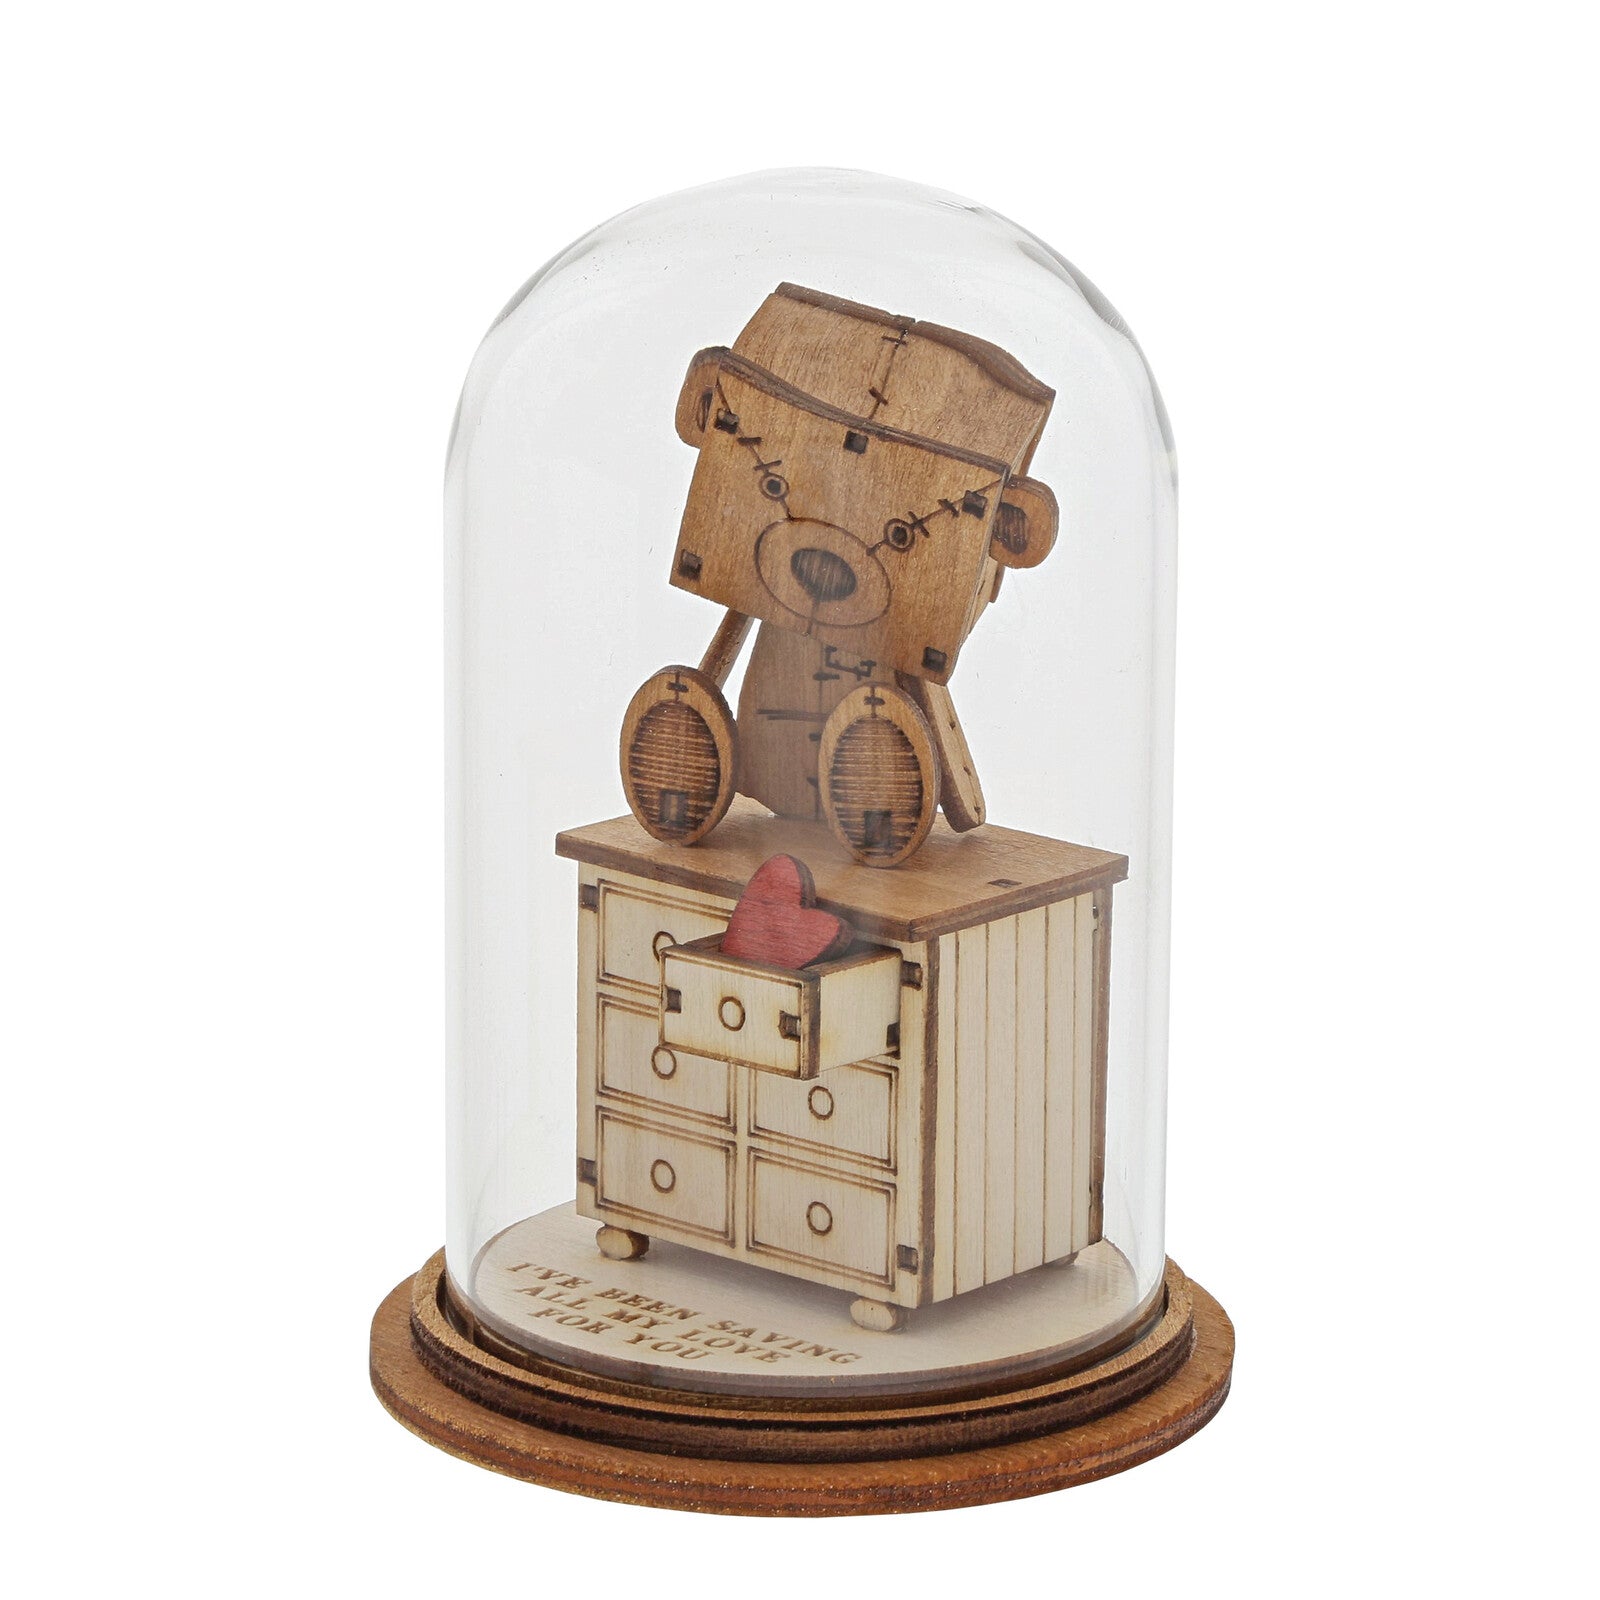 THE LITTLE WOODEN BEAR LOTS OF LOVE DOME FIGURINE - Gifts R Us